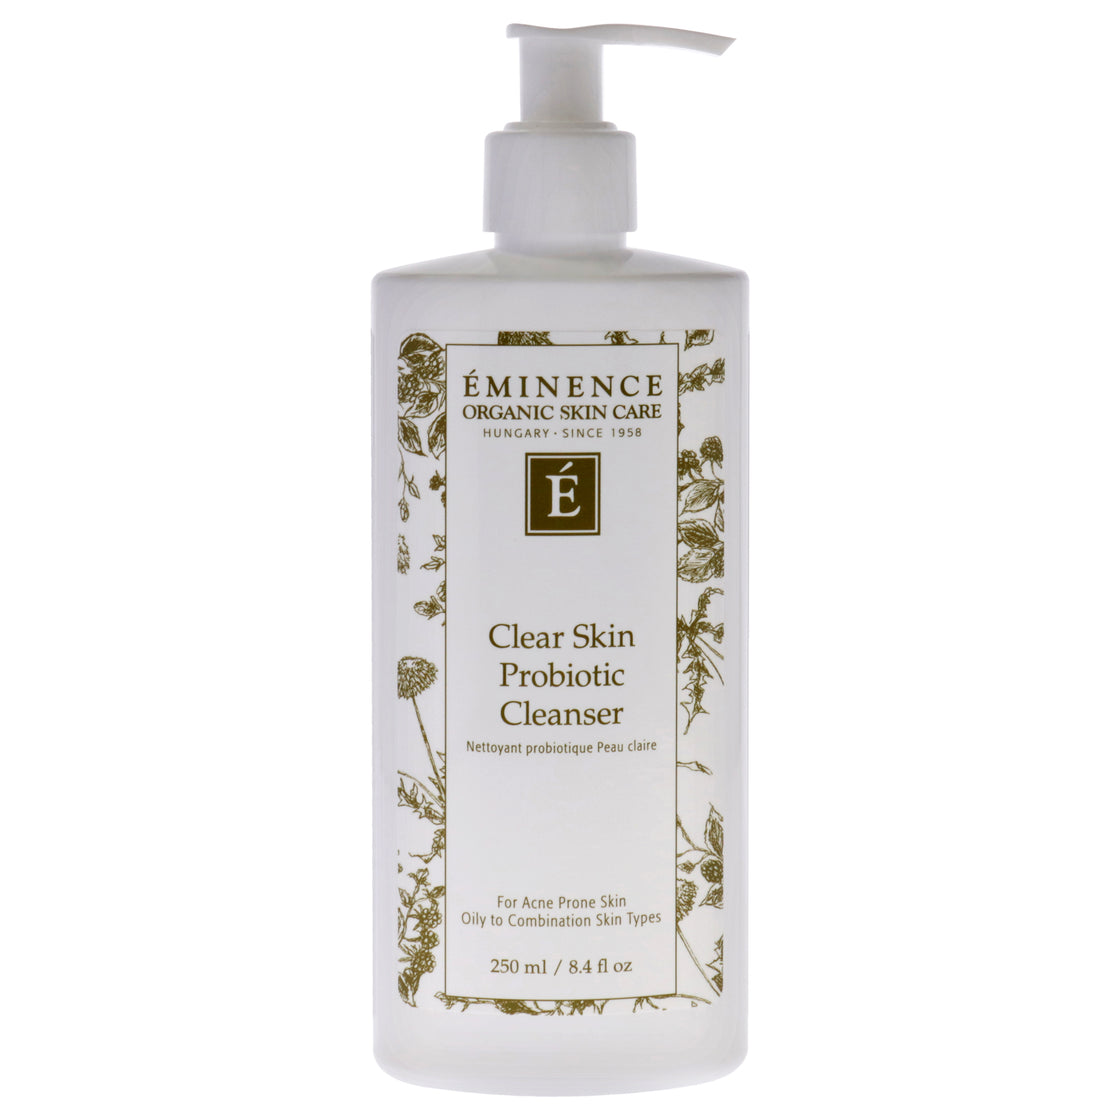 Clear Skin Probiotic Cleanser by Eminence for Unisex - 8.4 oz Cleanser